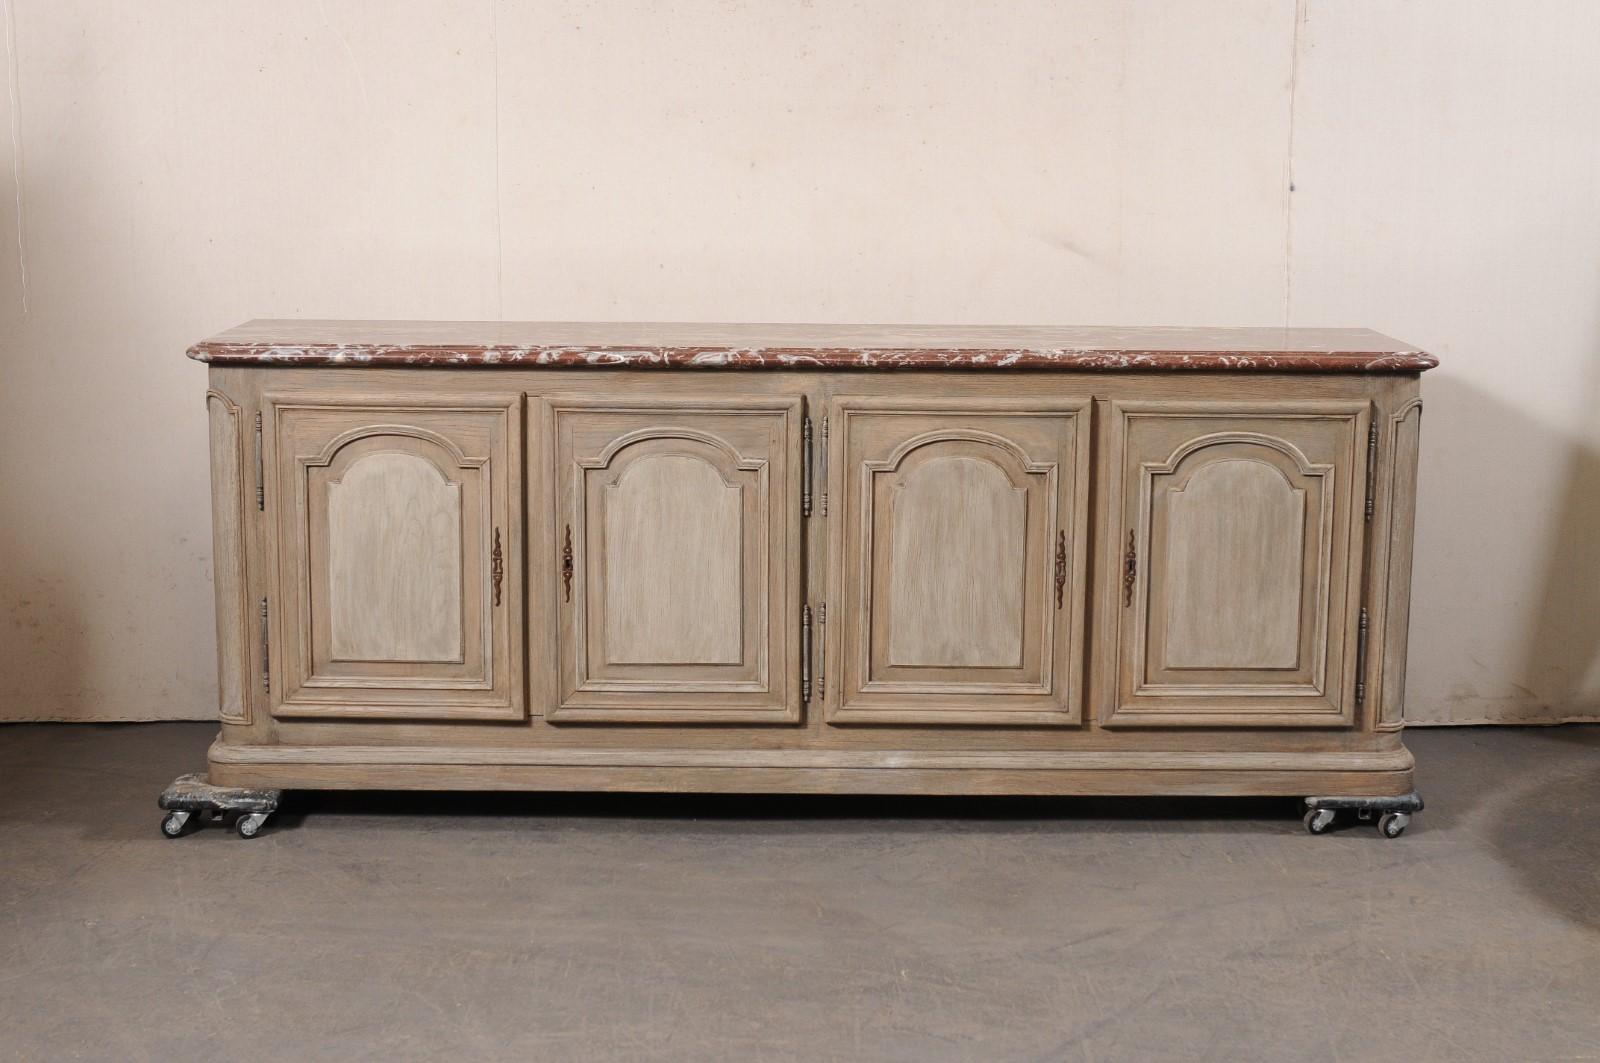 18th century French 4-Door Enfilade w/its Original Marble Top, 8ft Long For Sale 5